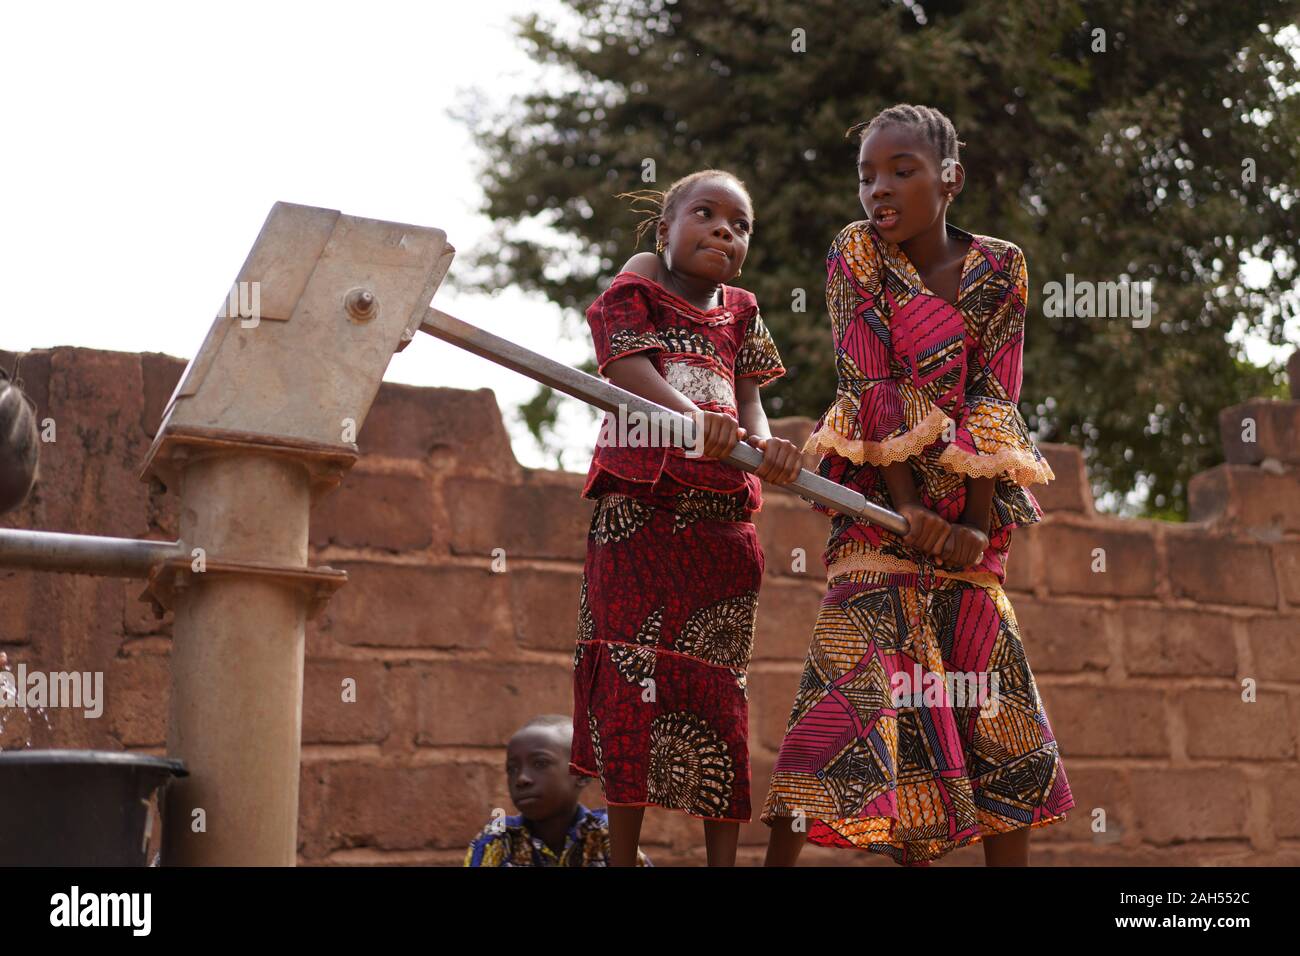 Young Girls Helping Each Other Pumping Water At An African Village Borehole Stock Photo